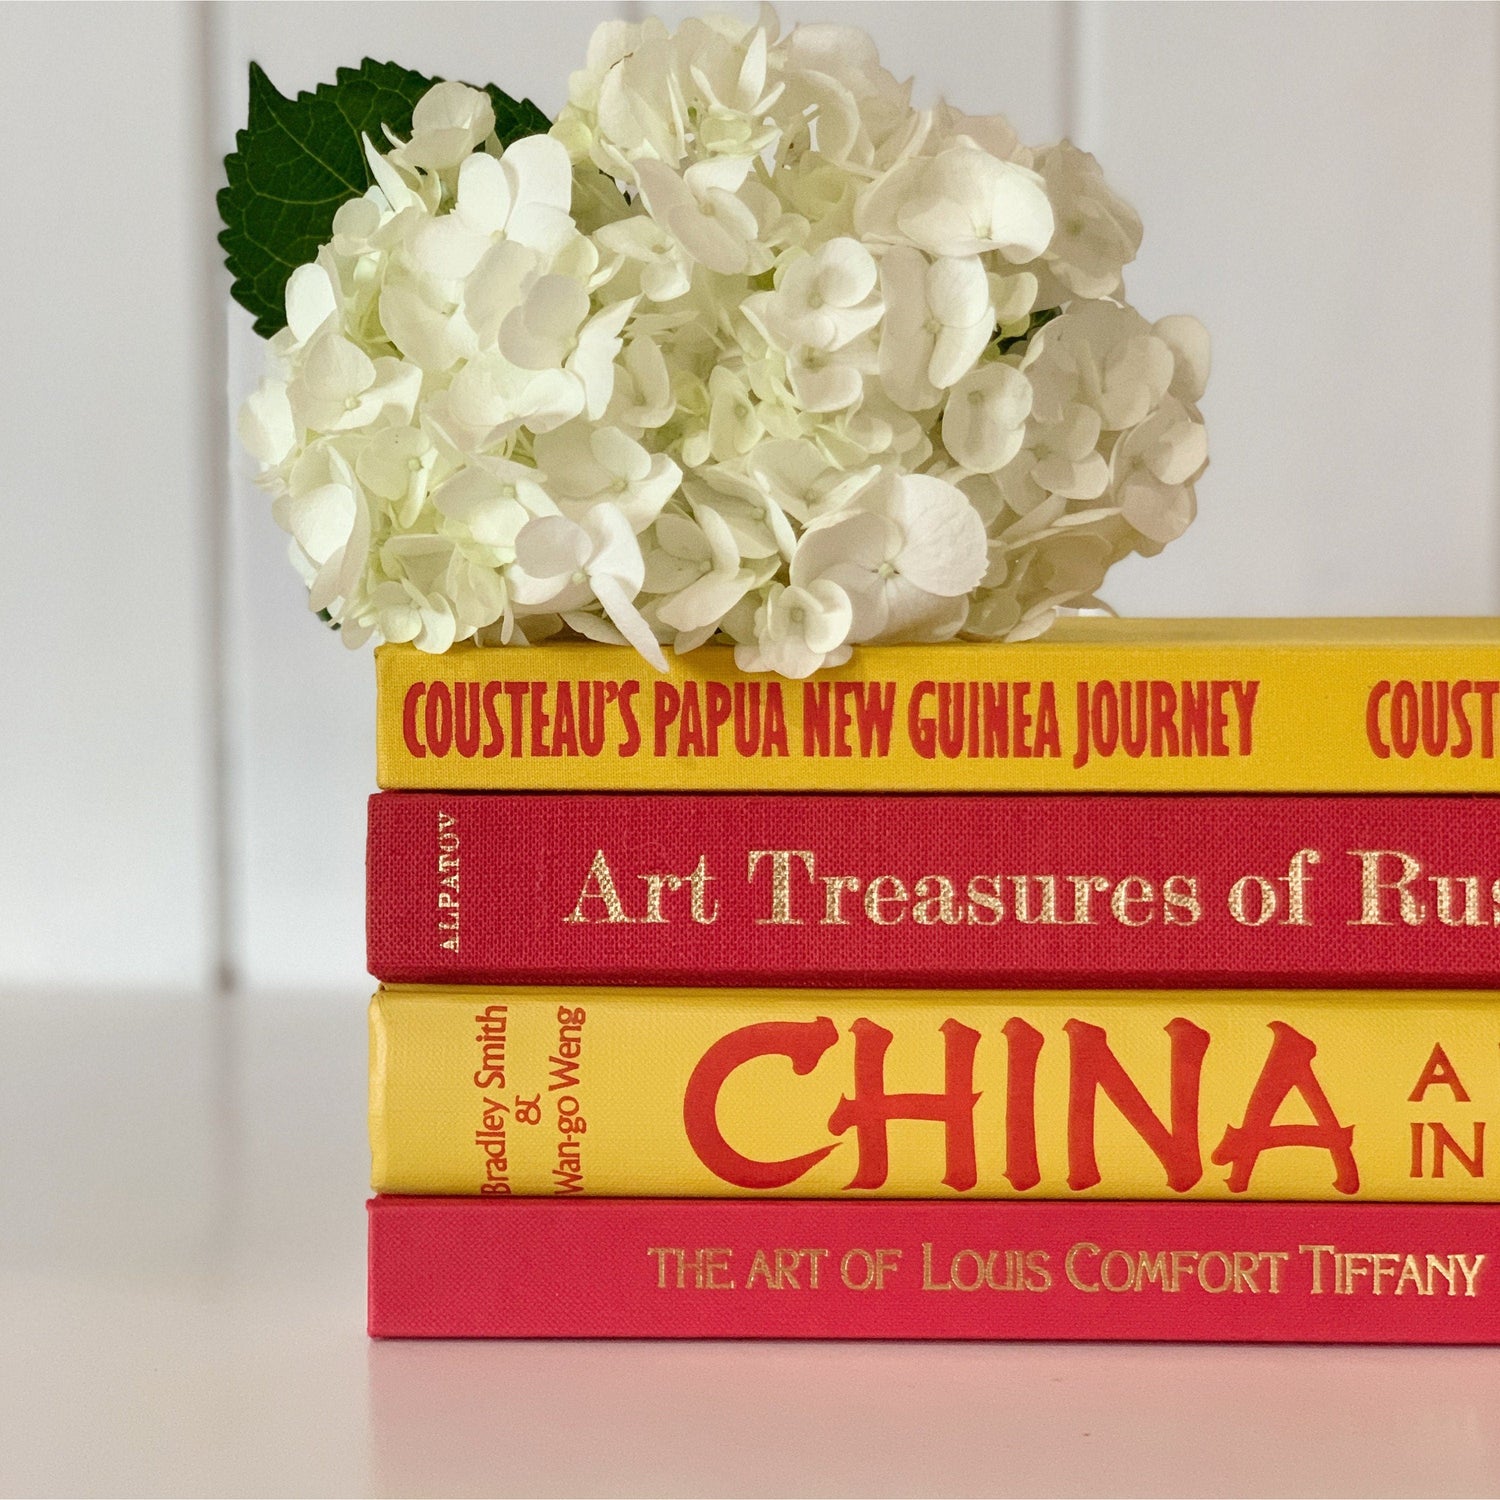 Vintage Red and Yellow Art Themed Coffee Table Book Set, Bright Book Decor